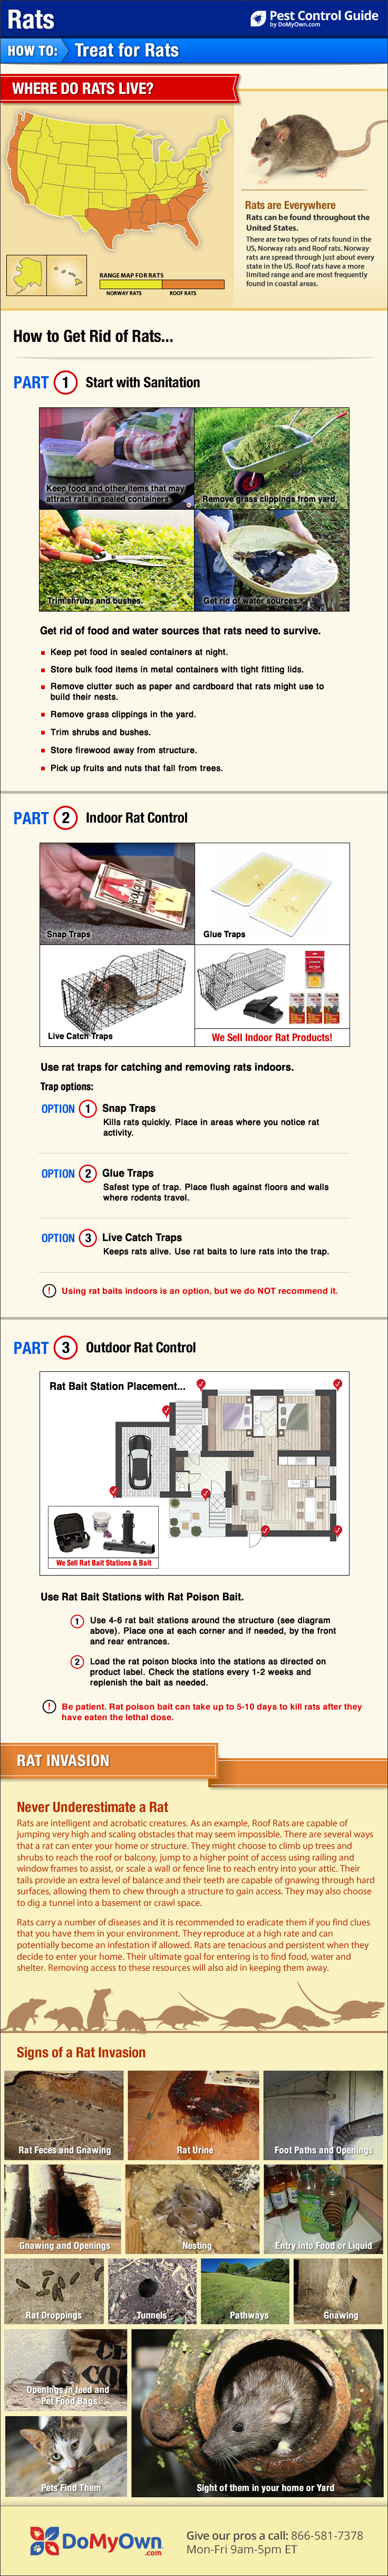 How To Get Rid Of Rats DIY Rat Control Guide